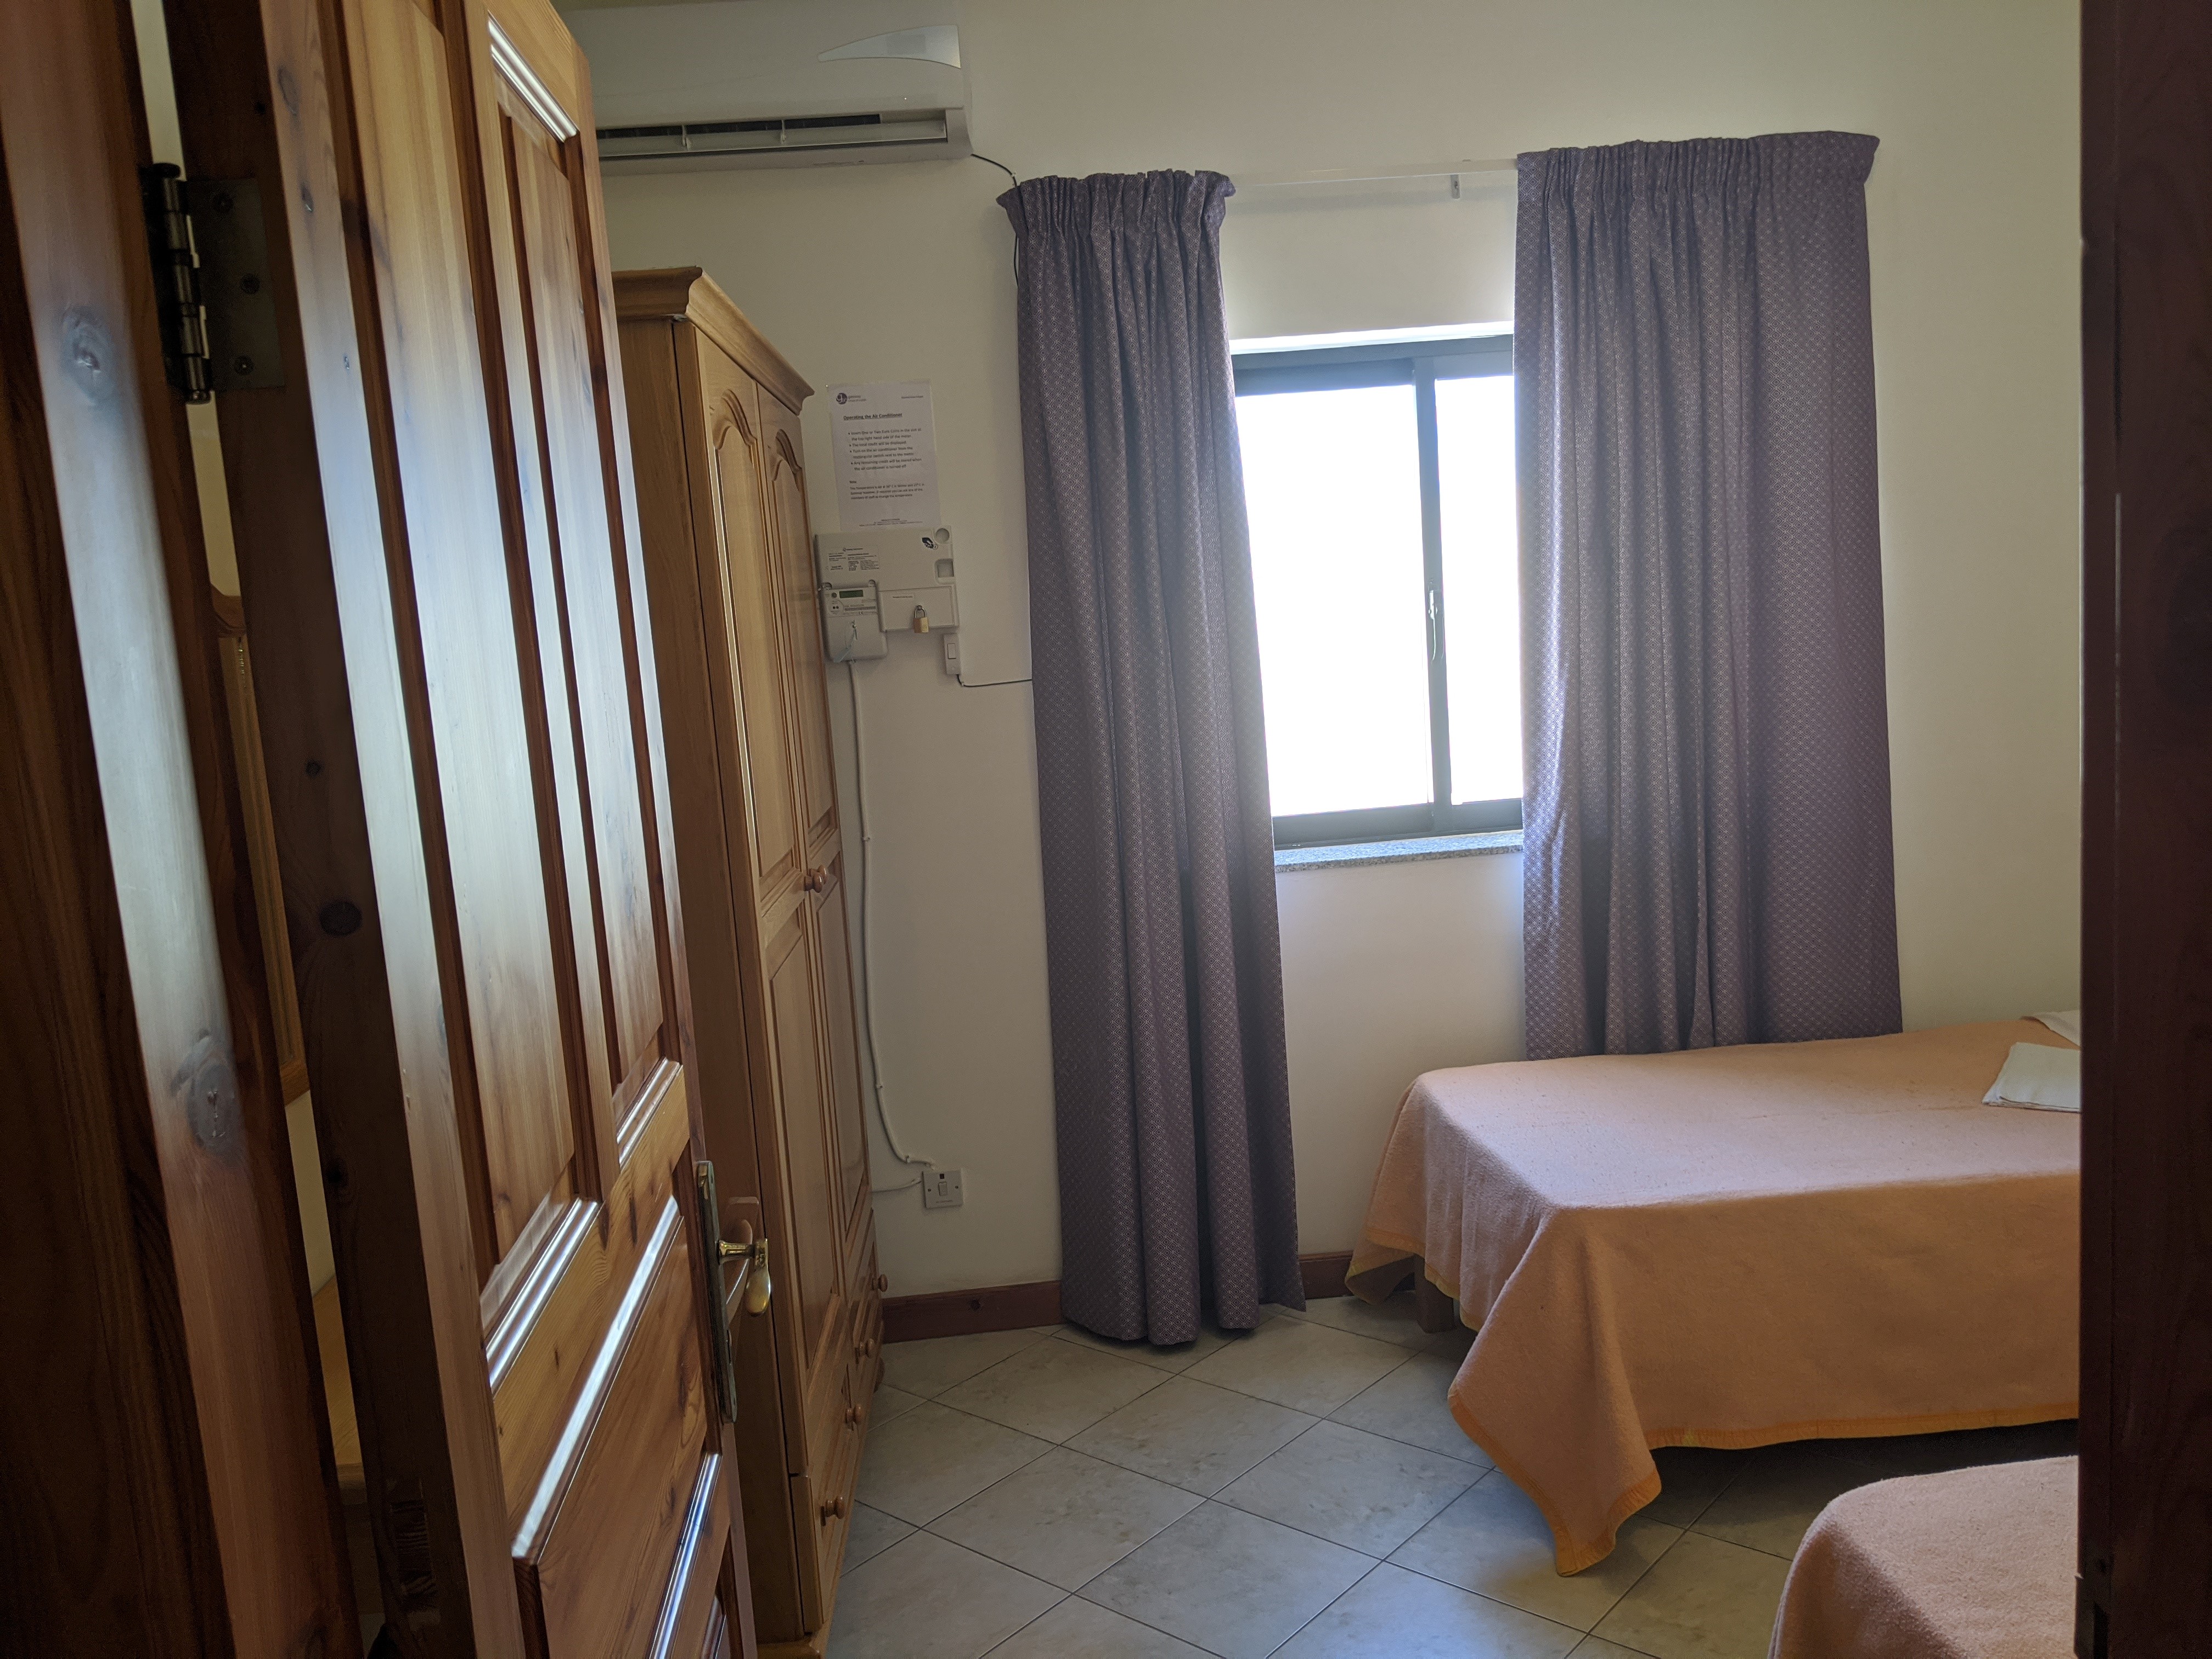 Study English in Malta - GSE Residence bedrooms next to school with windows and balconies